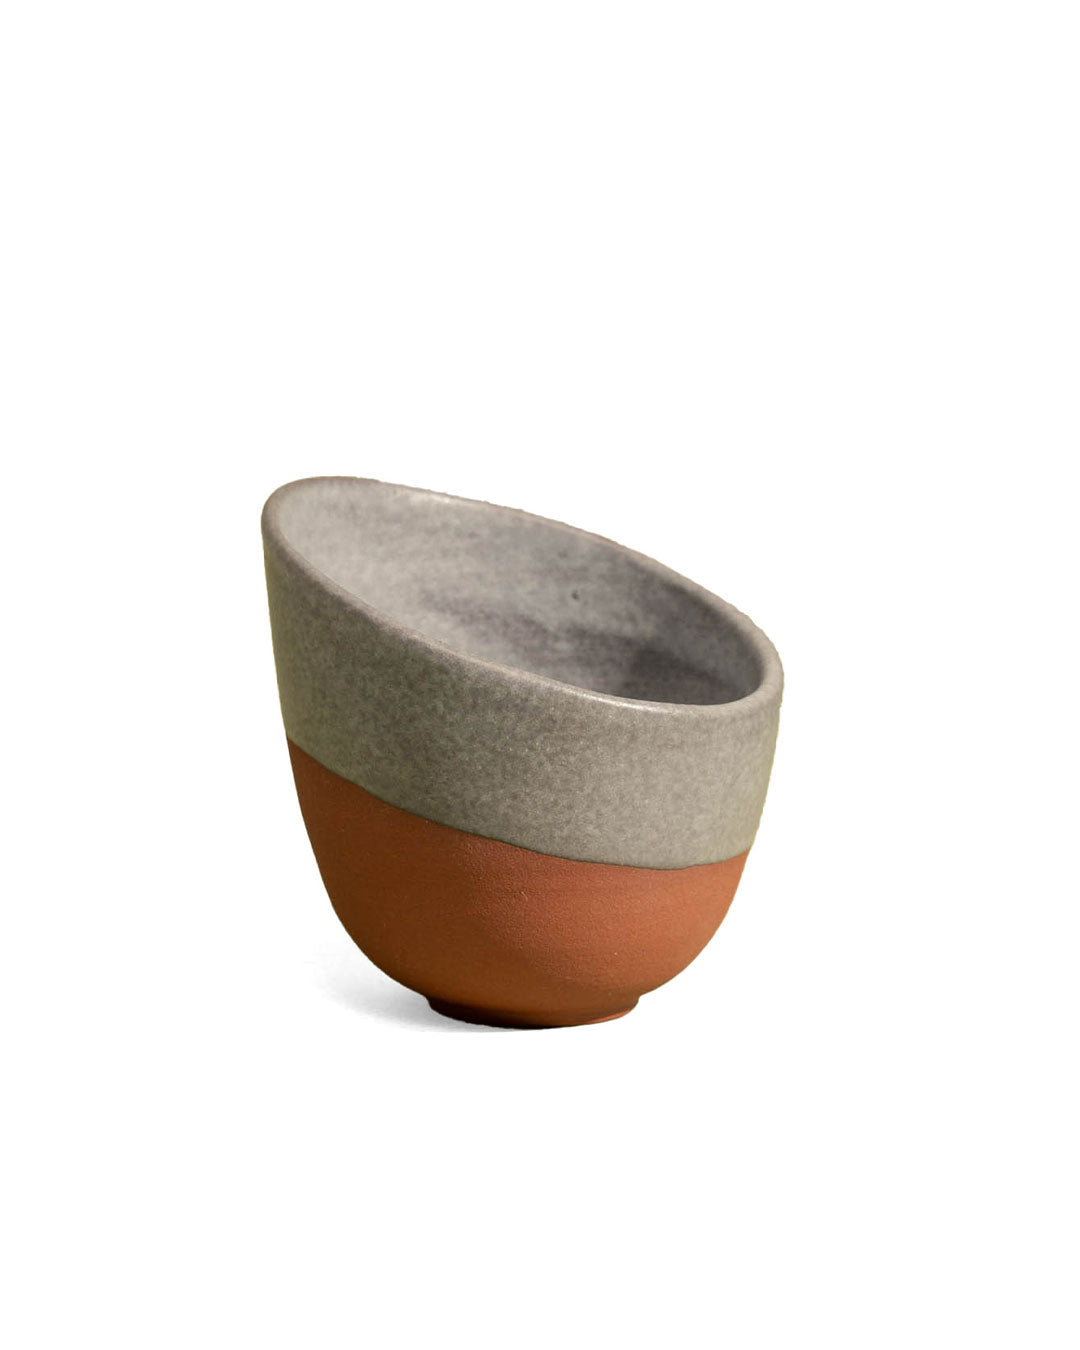 Beveled red stoneware cup